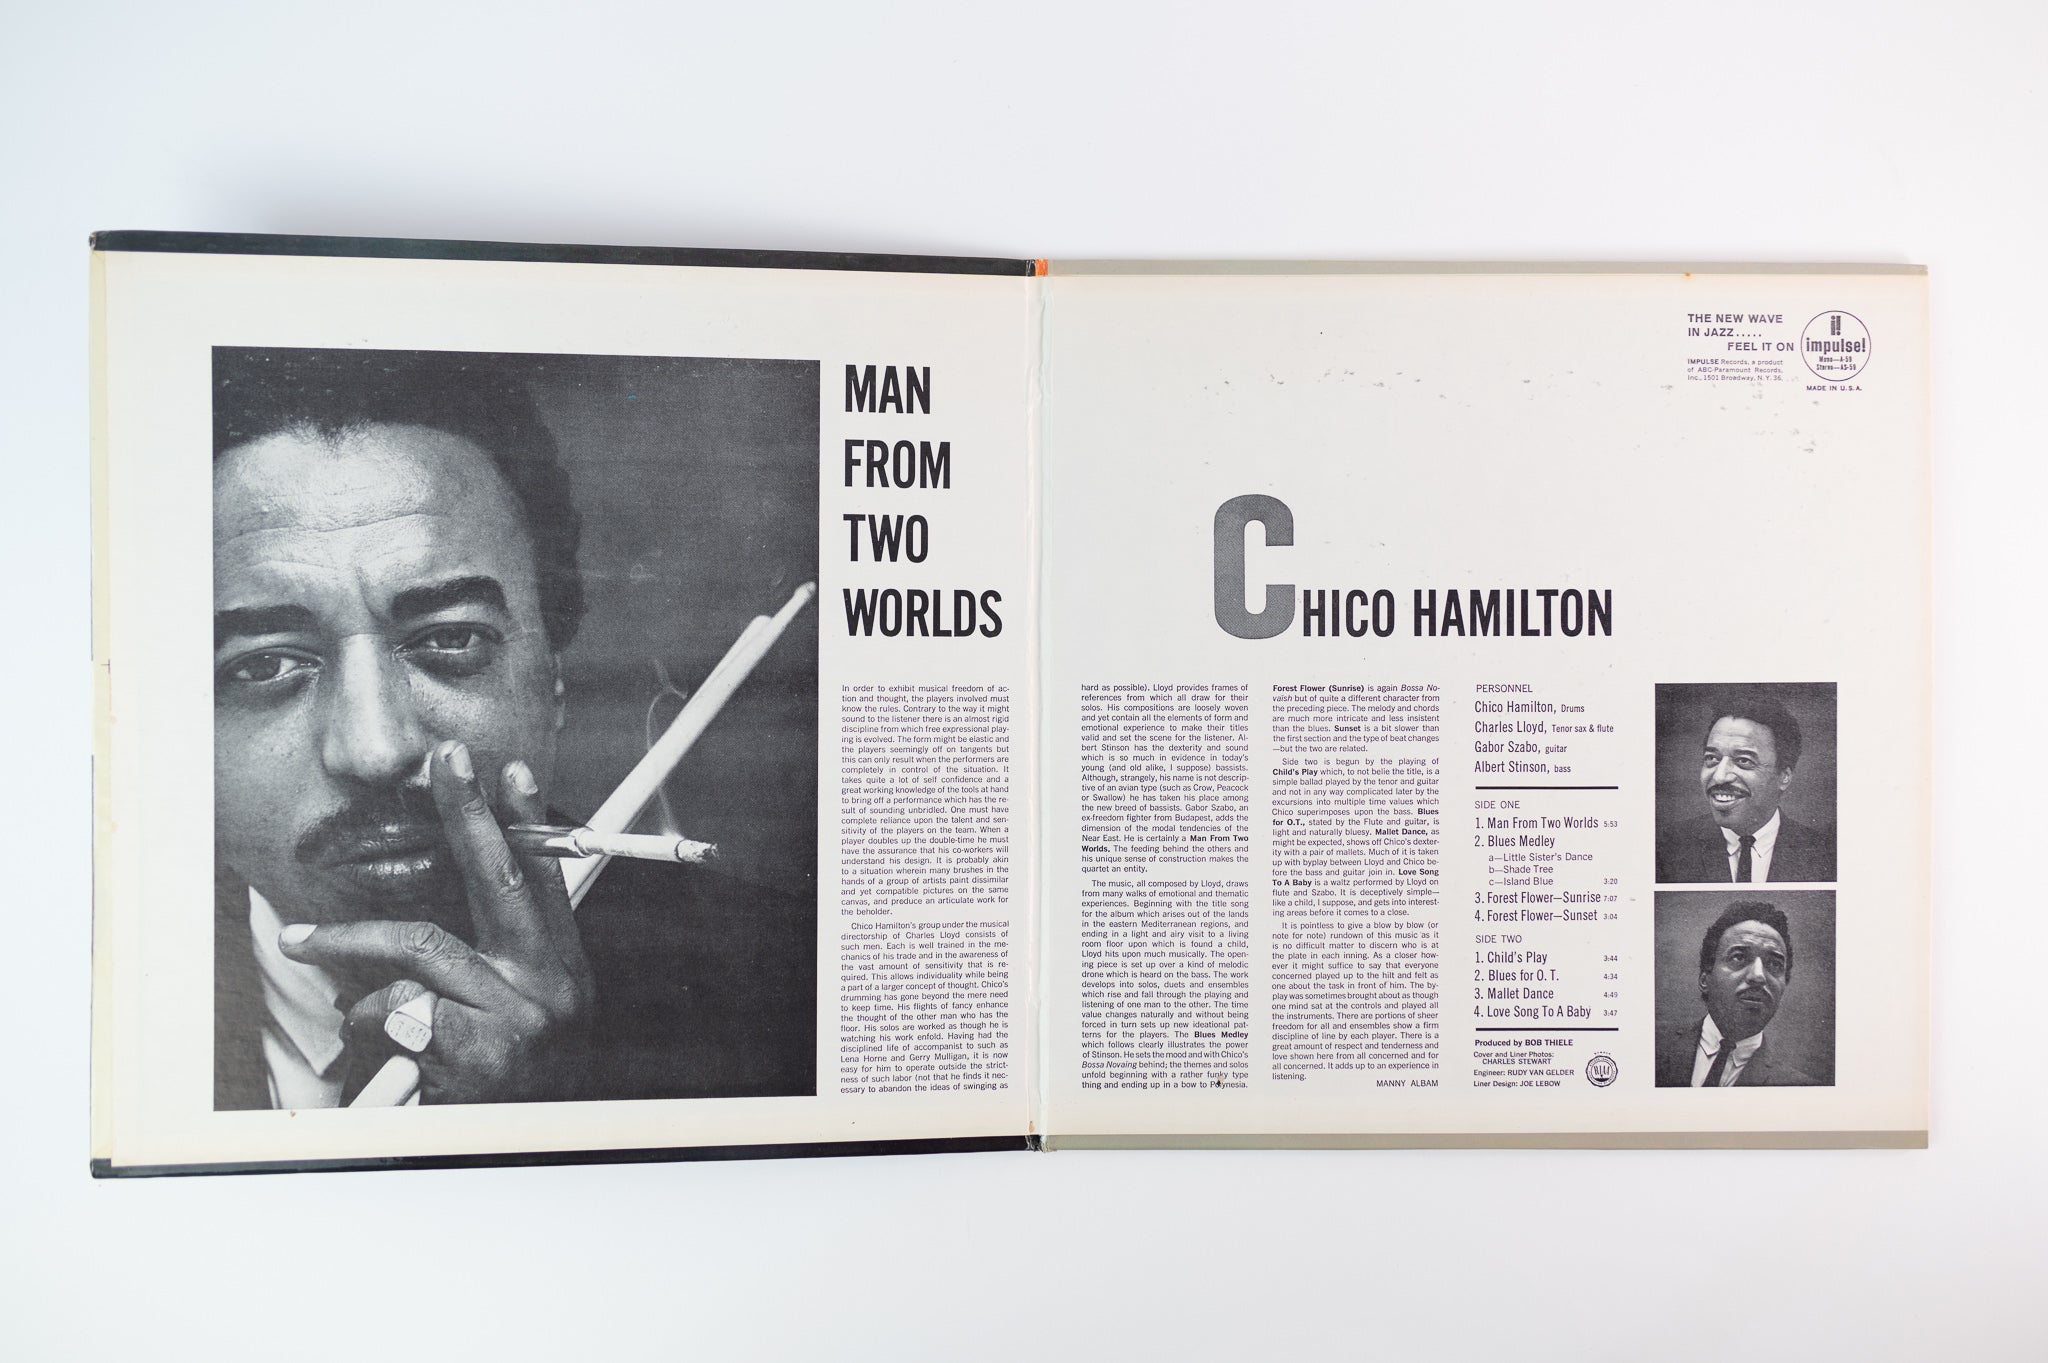 Chico Hamilton - Man From Two Worlds on Impulse Stereo